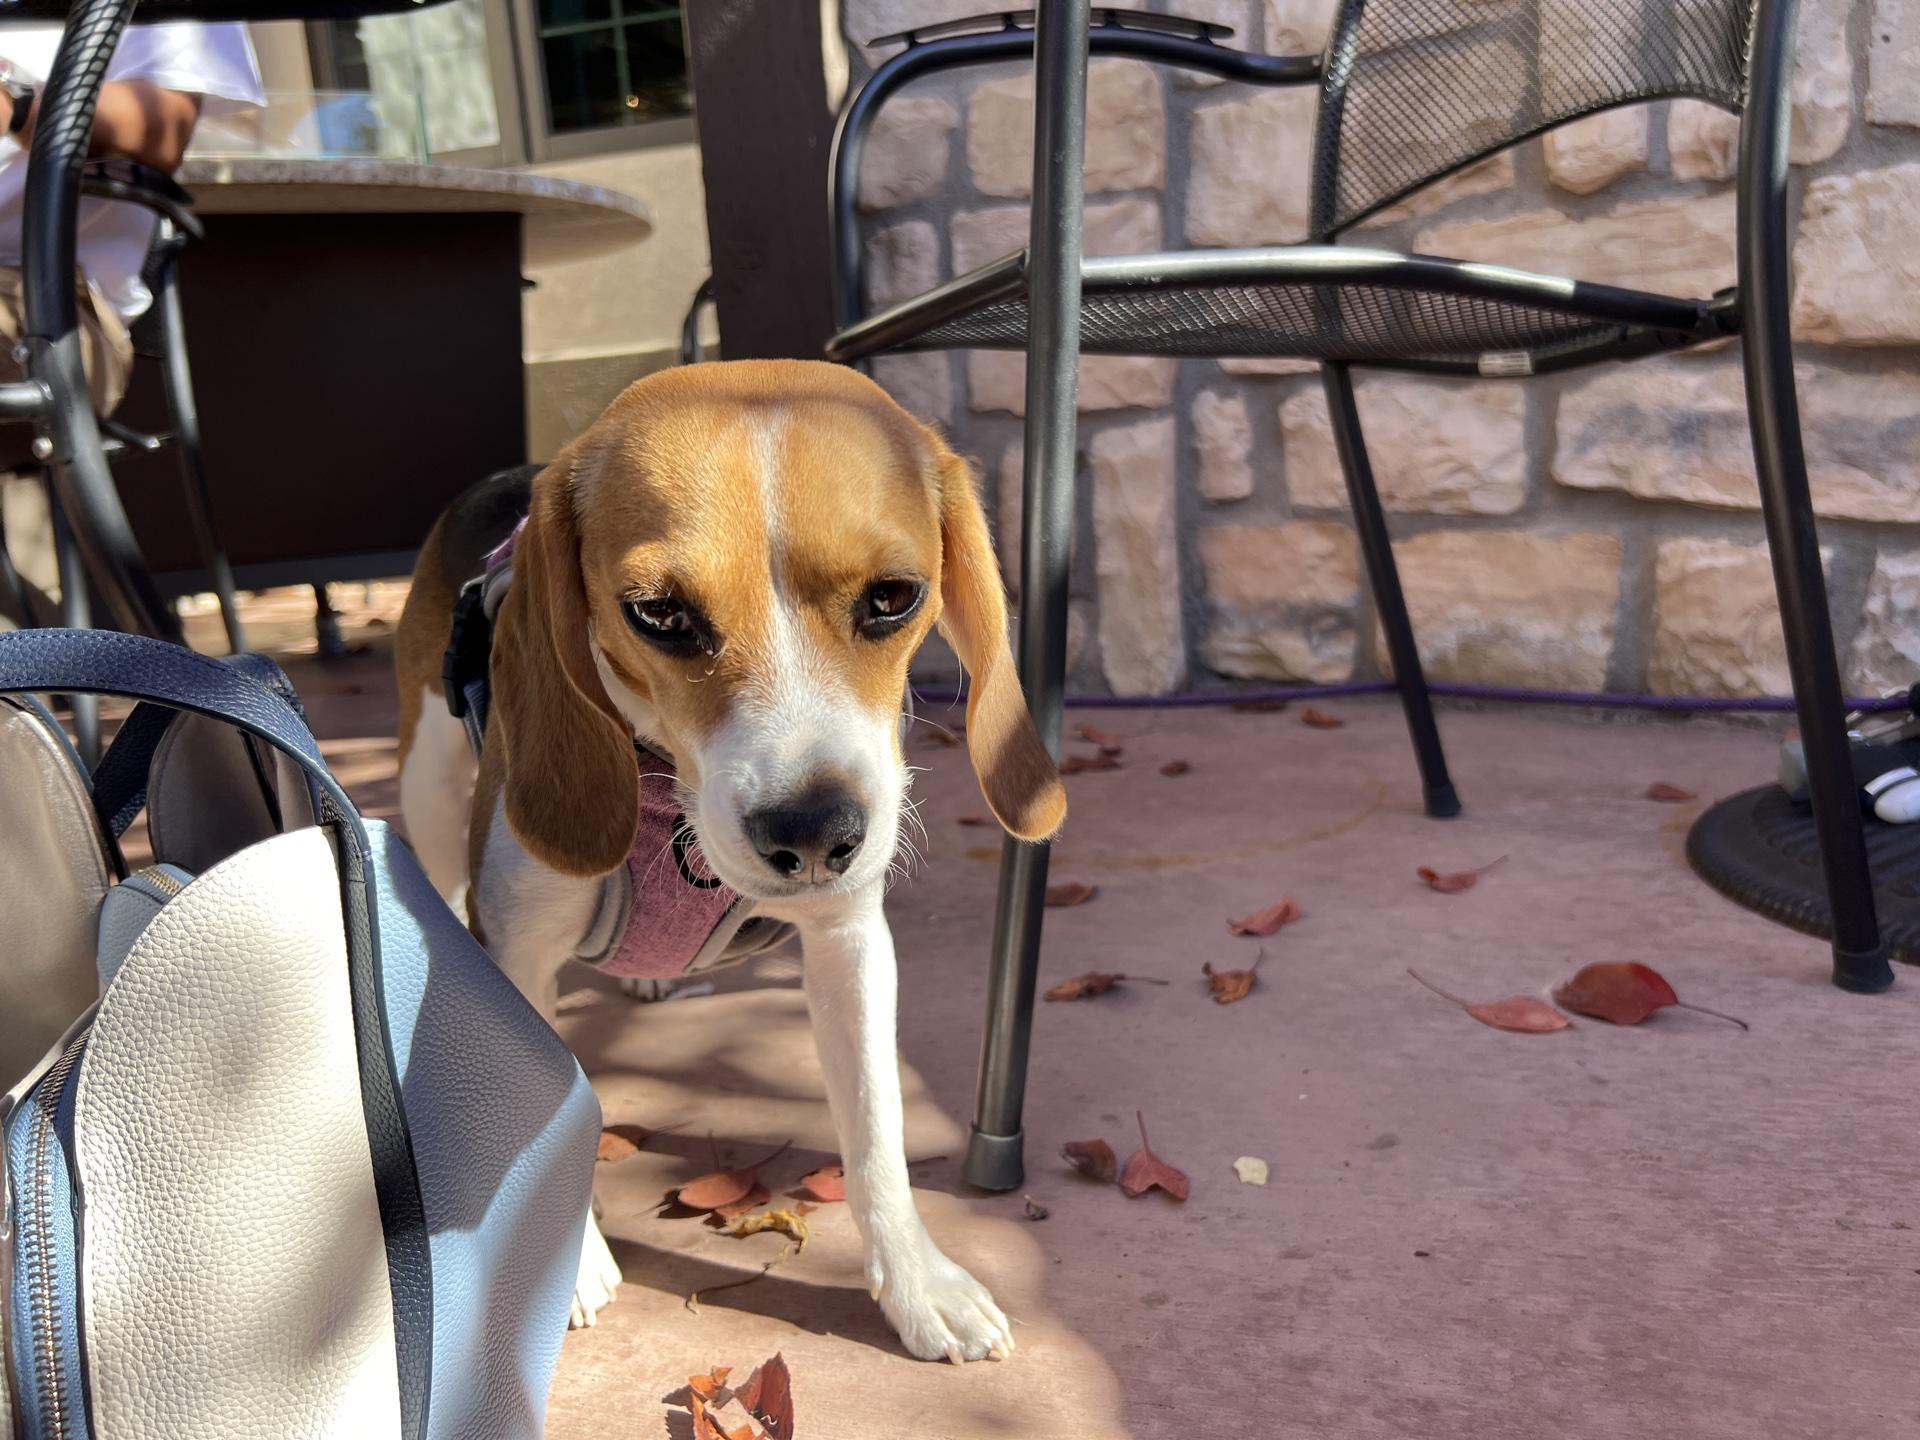 Pet Friendly Coyote's Southwestern Grill